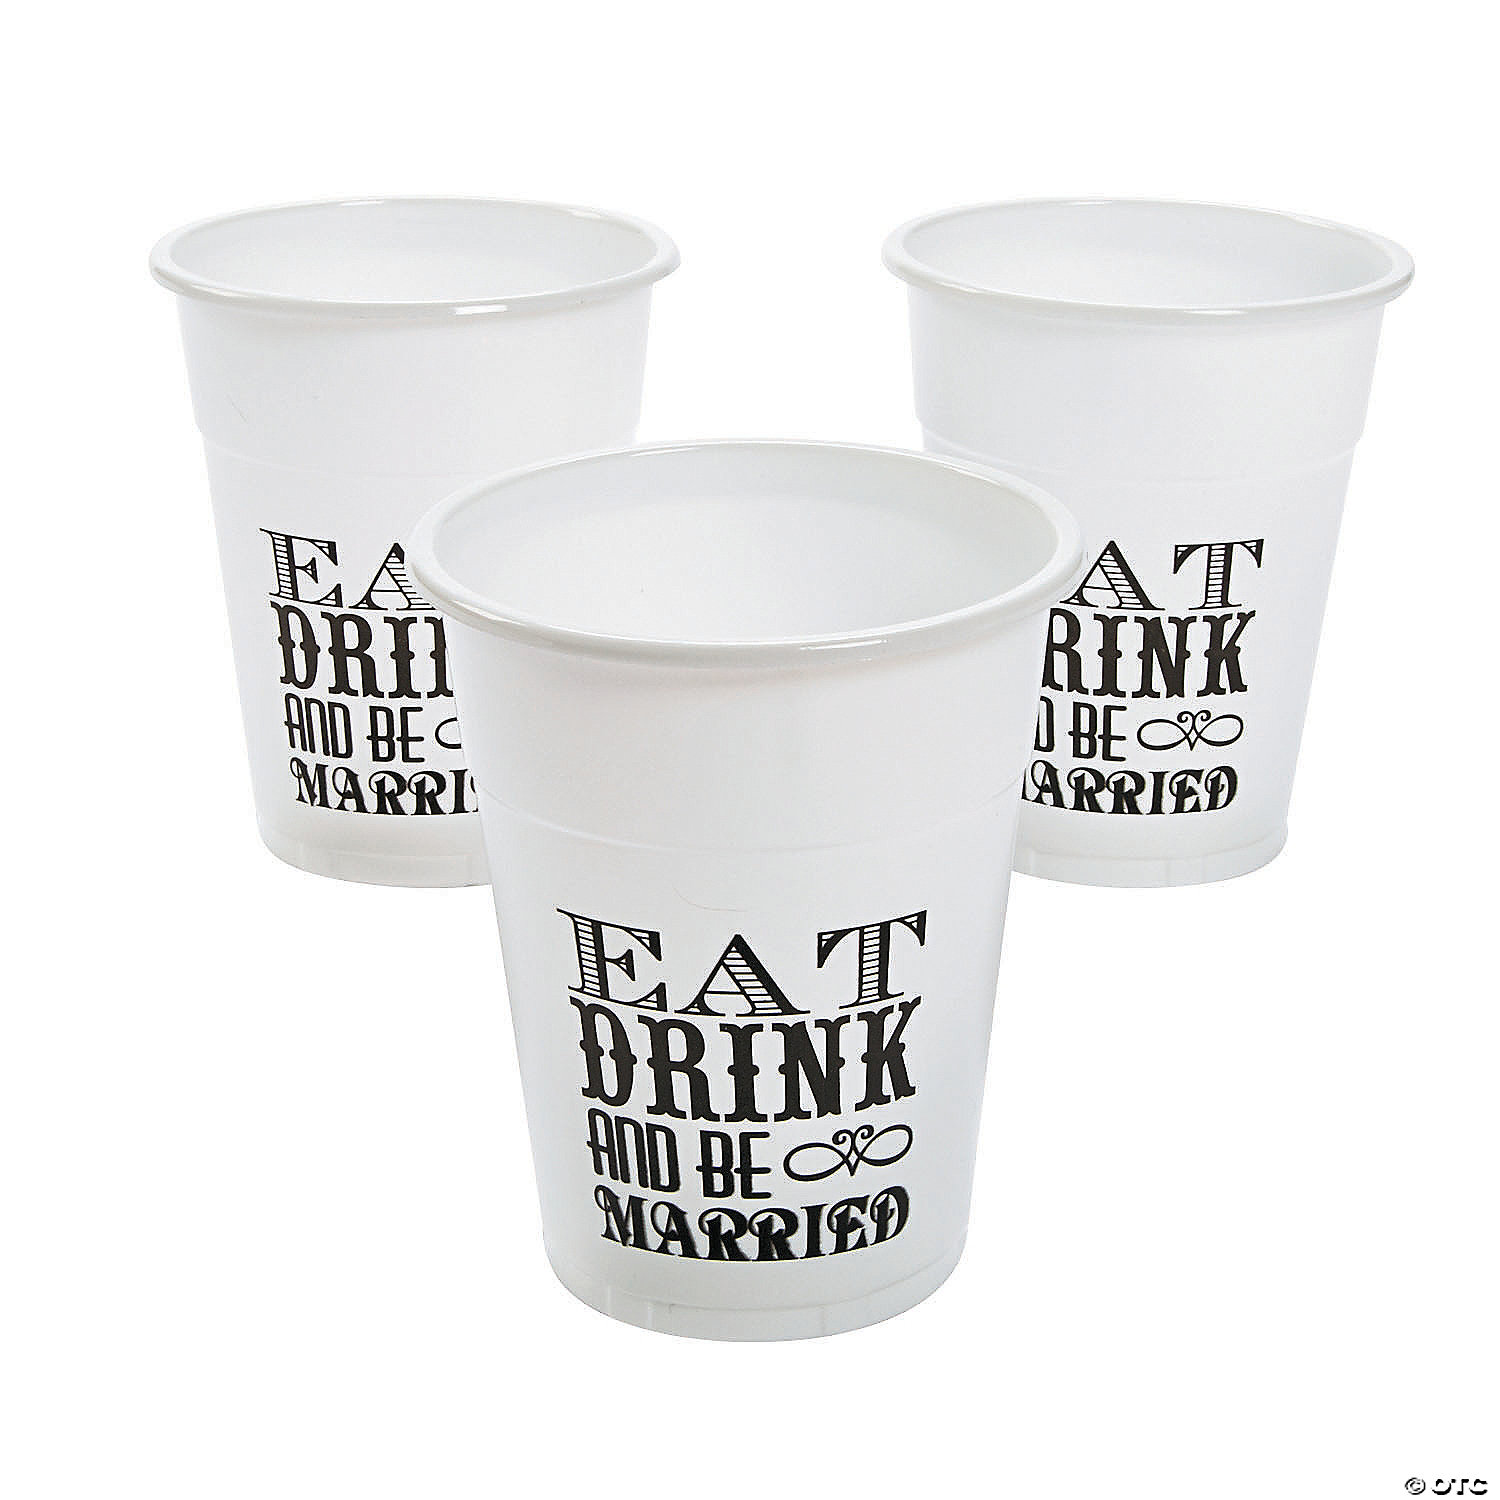 https://s7.orientaltrading.com/is/image/OrientalTrading/VIEWER_ZOOM/bulk-eat-drink-and-be-married-white-plastic-cups-150-pc-~13936996